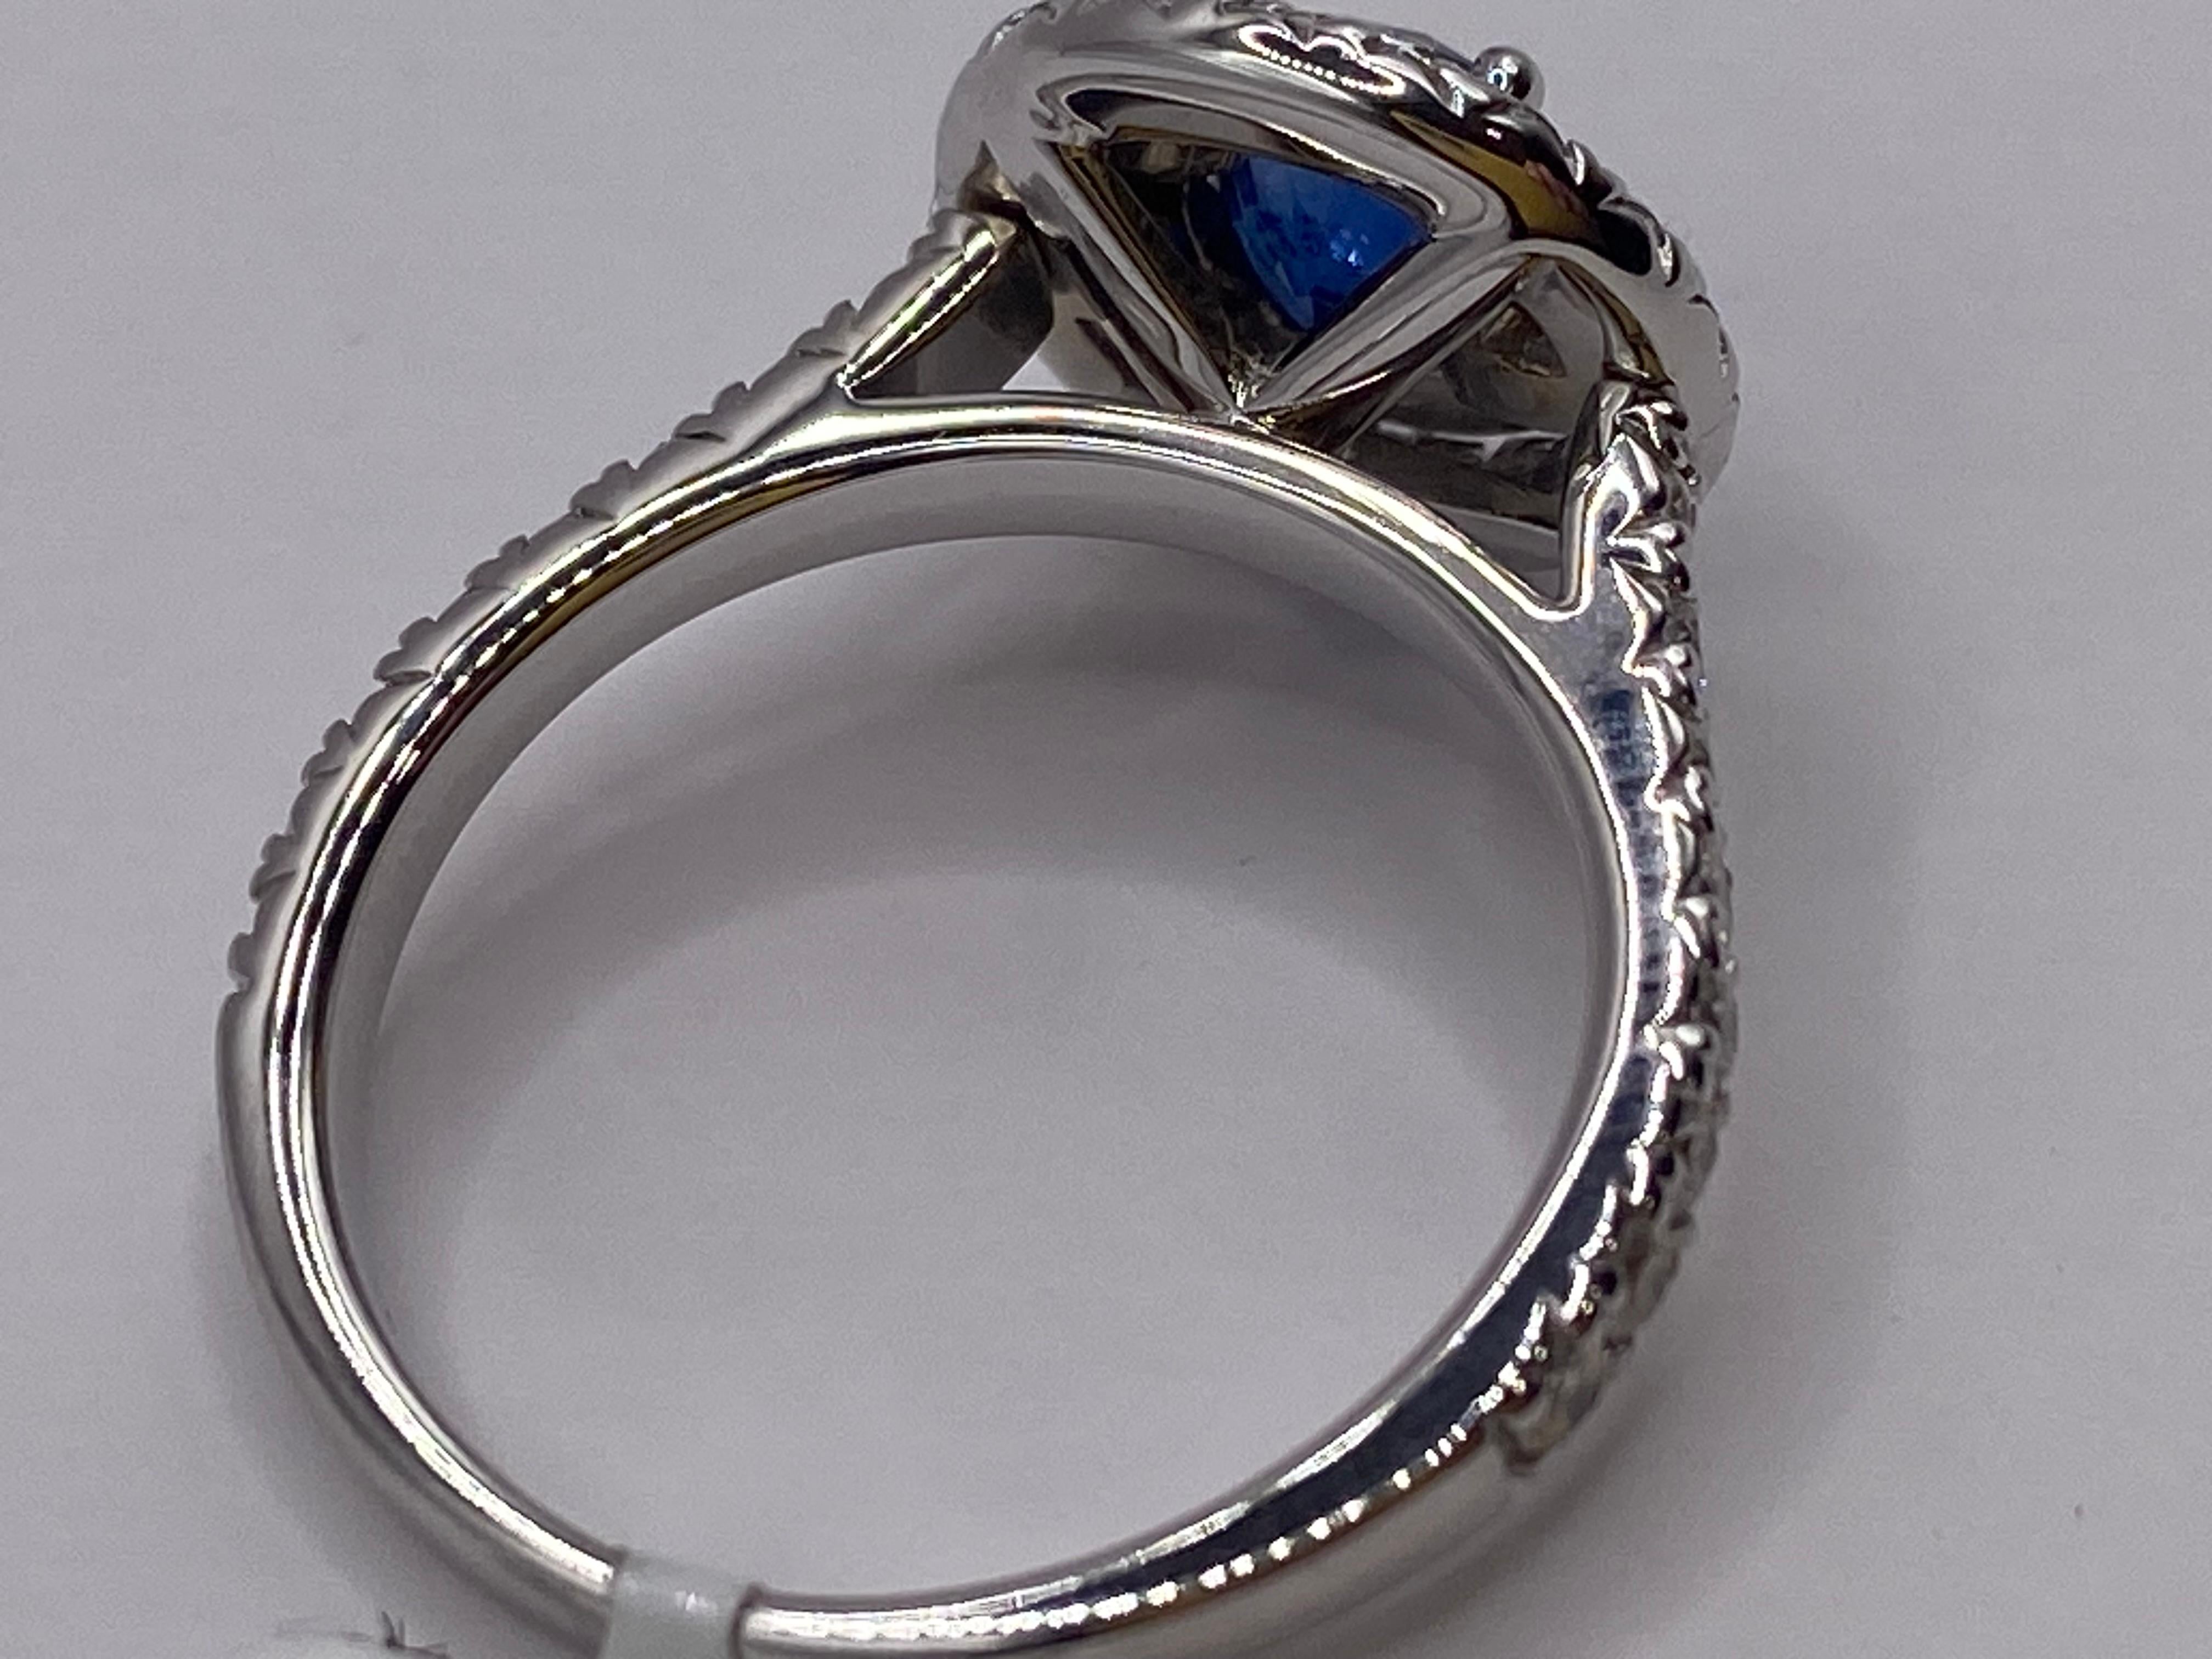 18KT White Gold
Ring Size: 6.5
(ring is size 6.5, but it sizable upon request)

Number of Sapphires: 1
Carat Weight: .92ctw
Stone Size: 5.25mm

Number of Diamonds: 47
Carat Weight: 1.00ctw